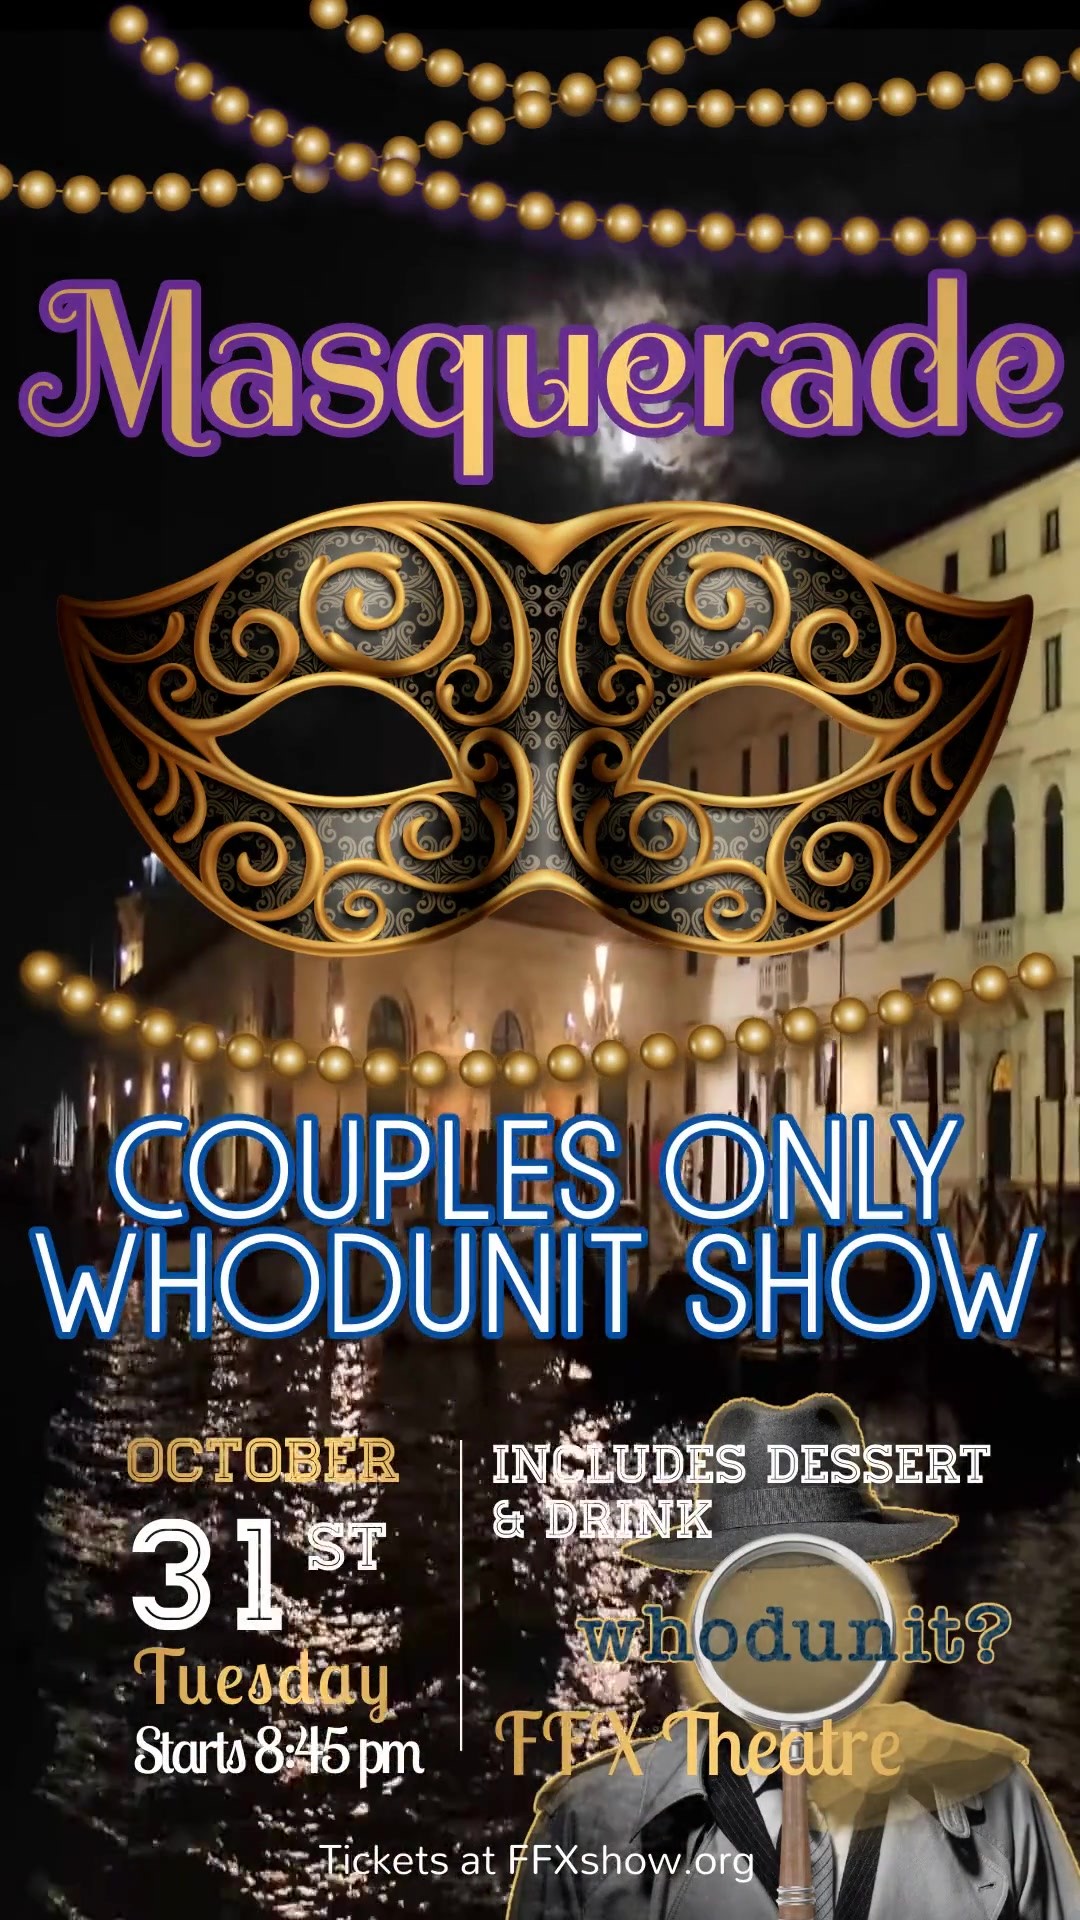 WHODUNIT for COUPLES! Masquerade Mystery Show POST-Trick-or-Treating Halloween Fun + Dessert! on Oct 31, 20:45@FFX Theatre - Pick a seat, Buy tickets and Get information on Family Fun Xperience tickets.ffxshow.org